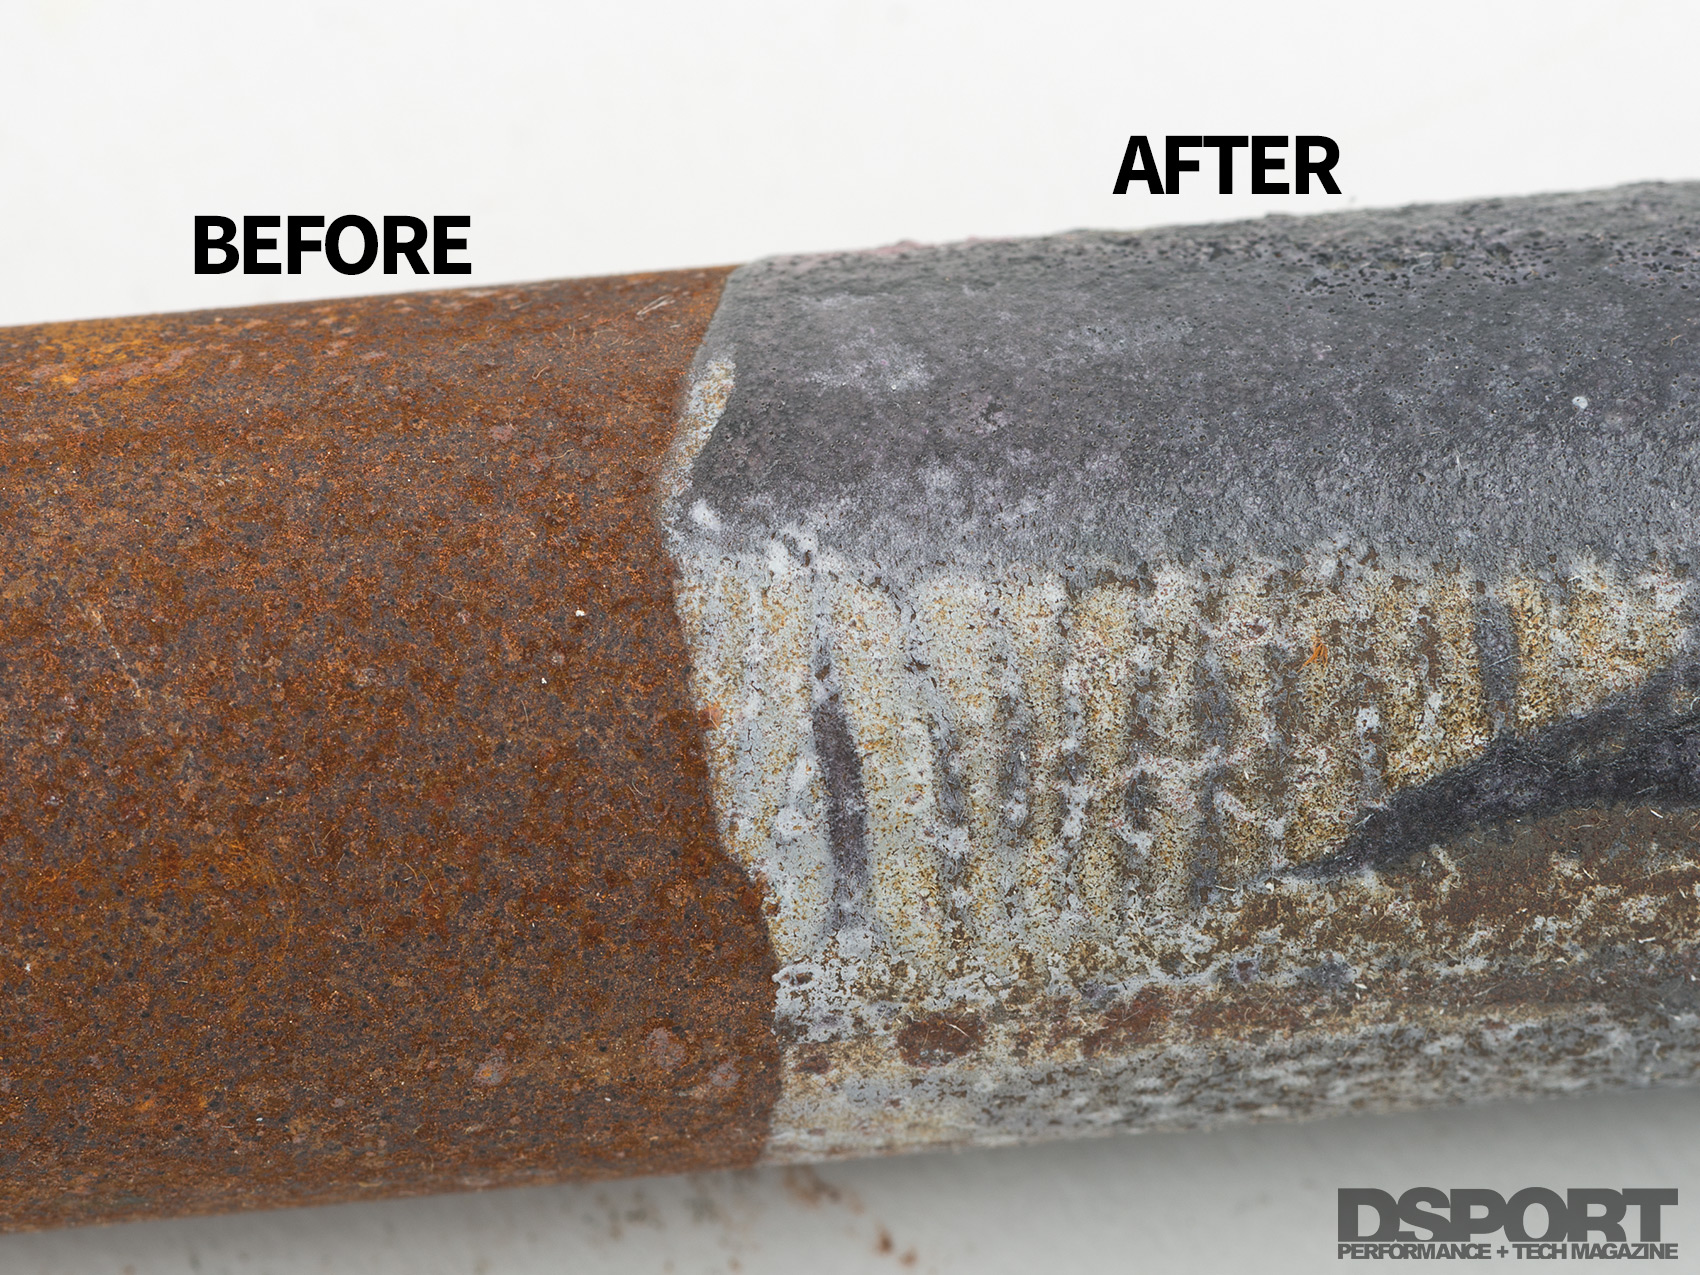 Surface Rust Removal: Eliminate the Iron Oxide, Bring Out the